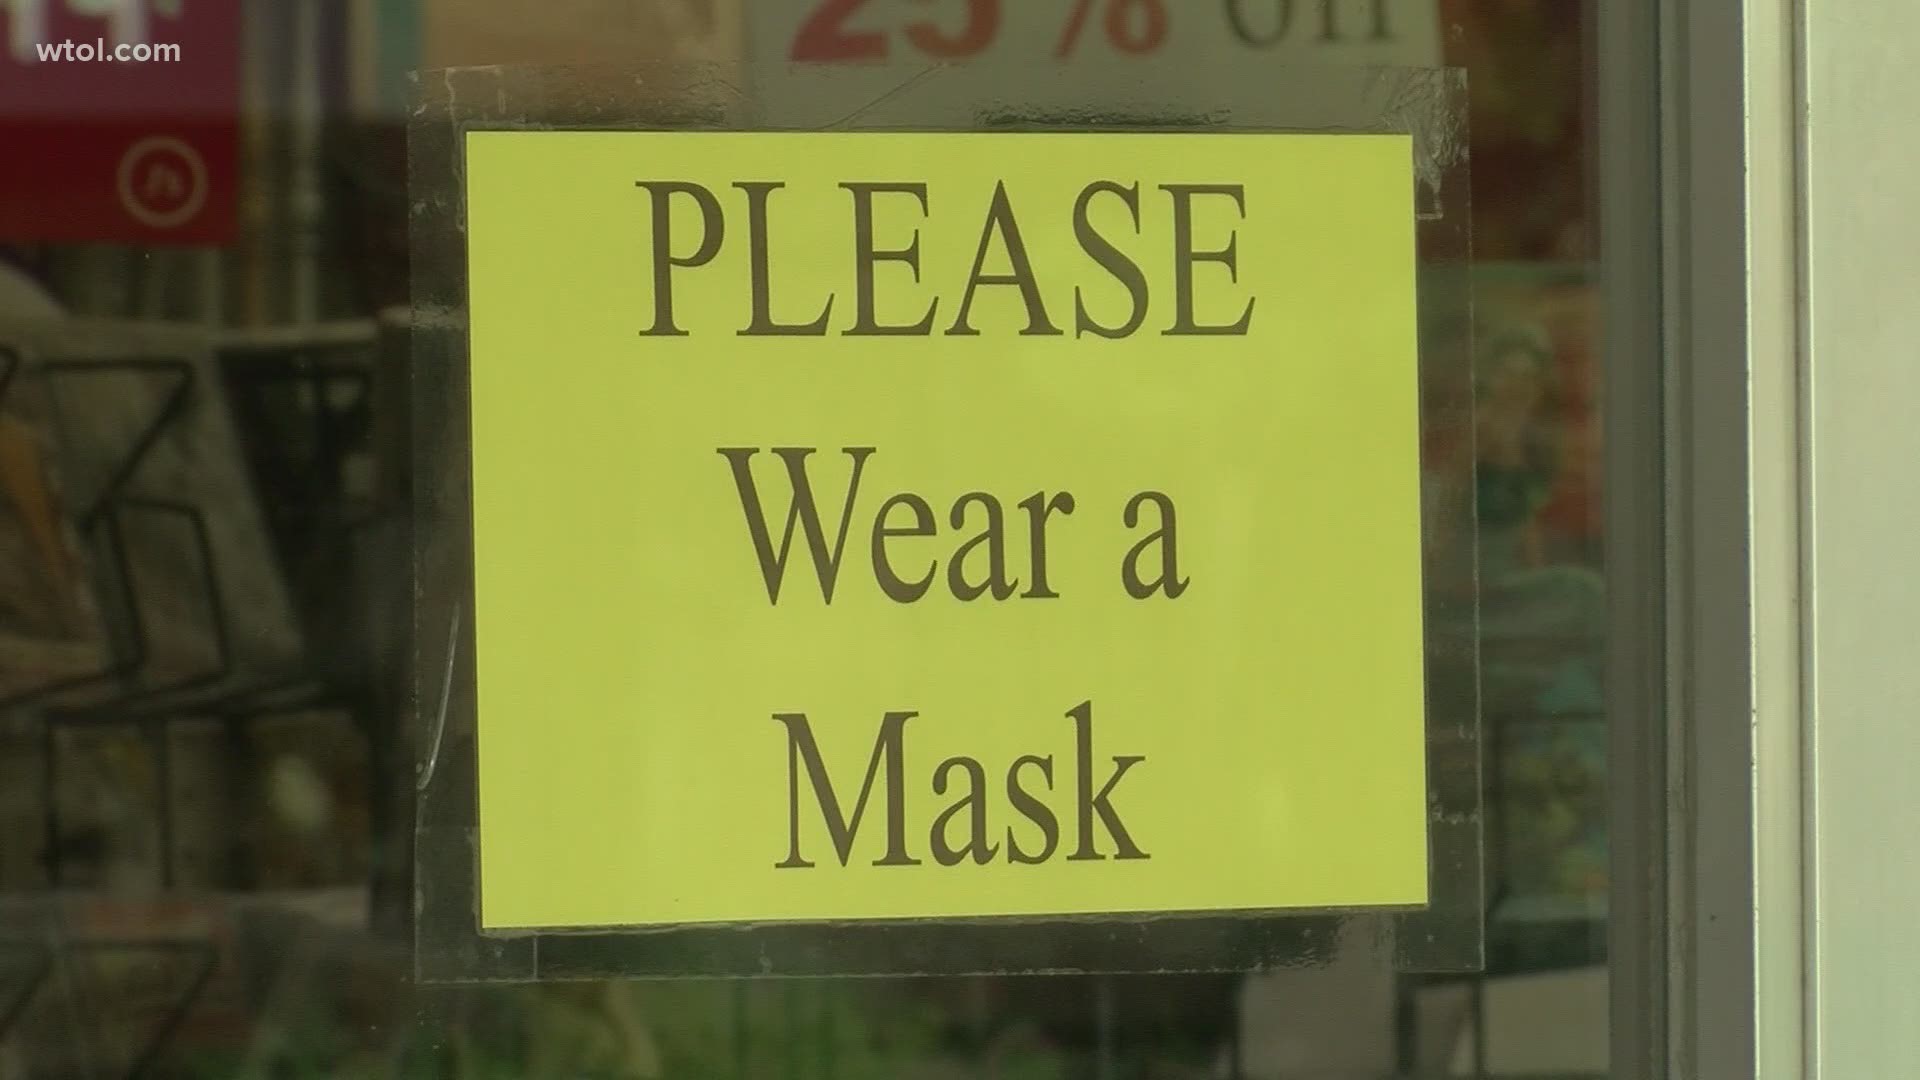 The sheriff says he's still following the law by refusing to cite or arrest people for not wearing a mask.